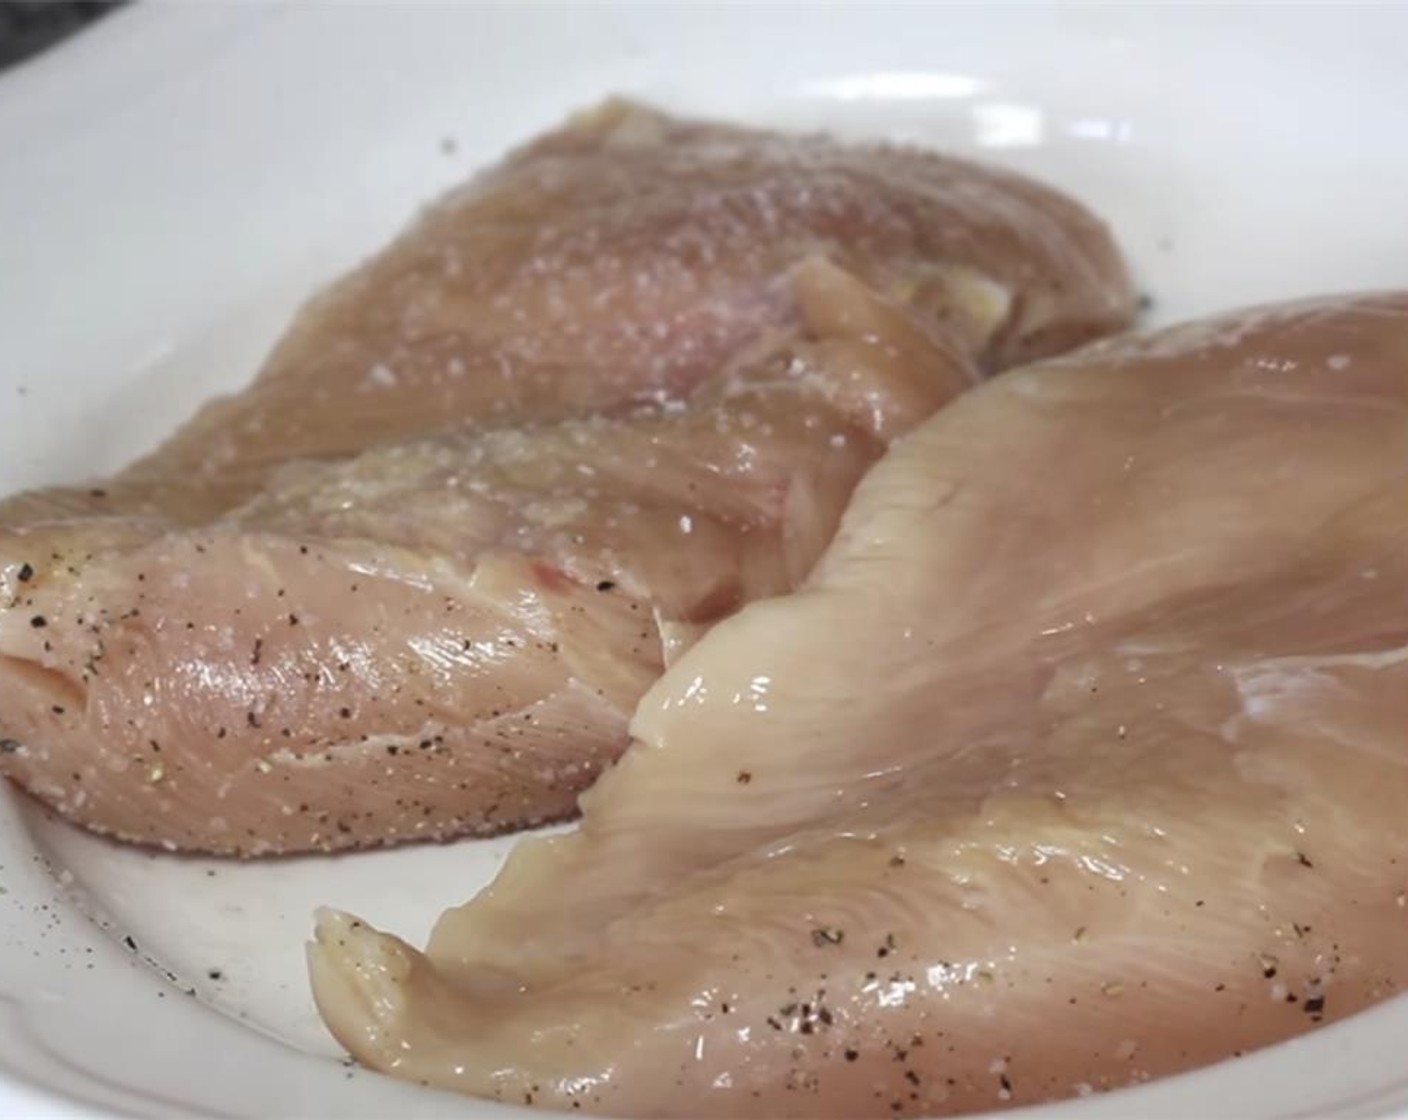 step 1 Pat dry and season generously the Boneless, Skinless Chicken Breasts (2).